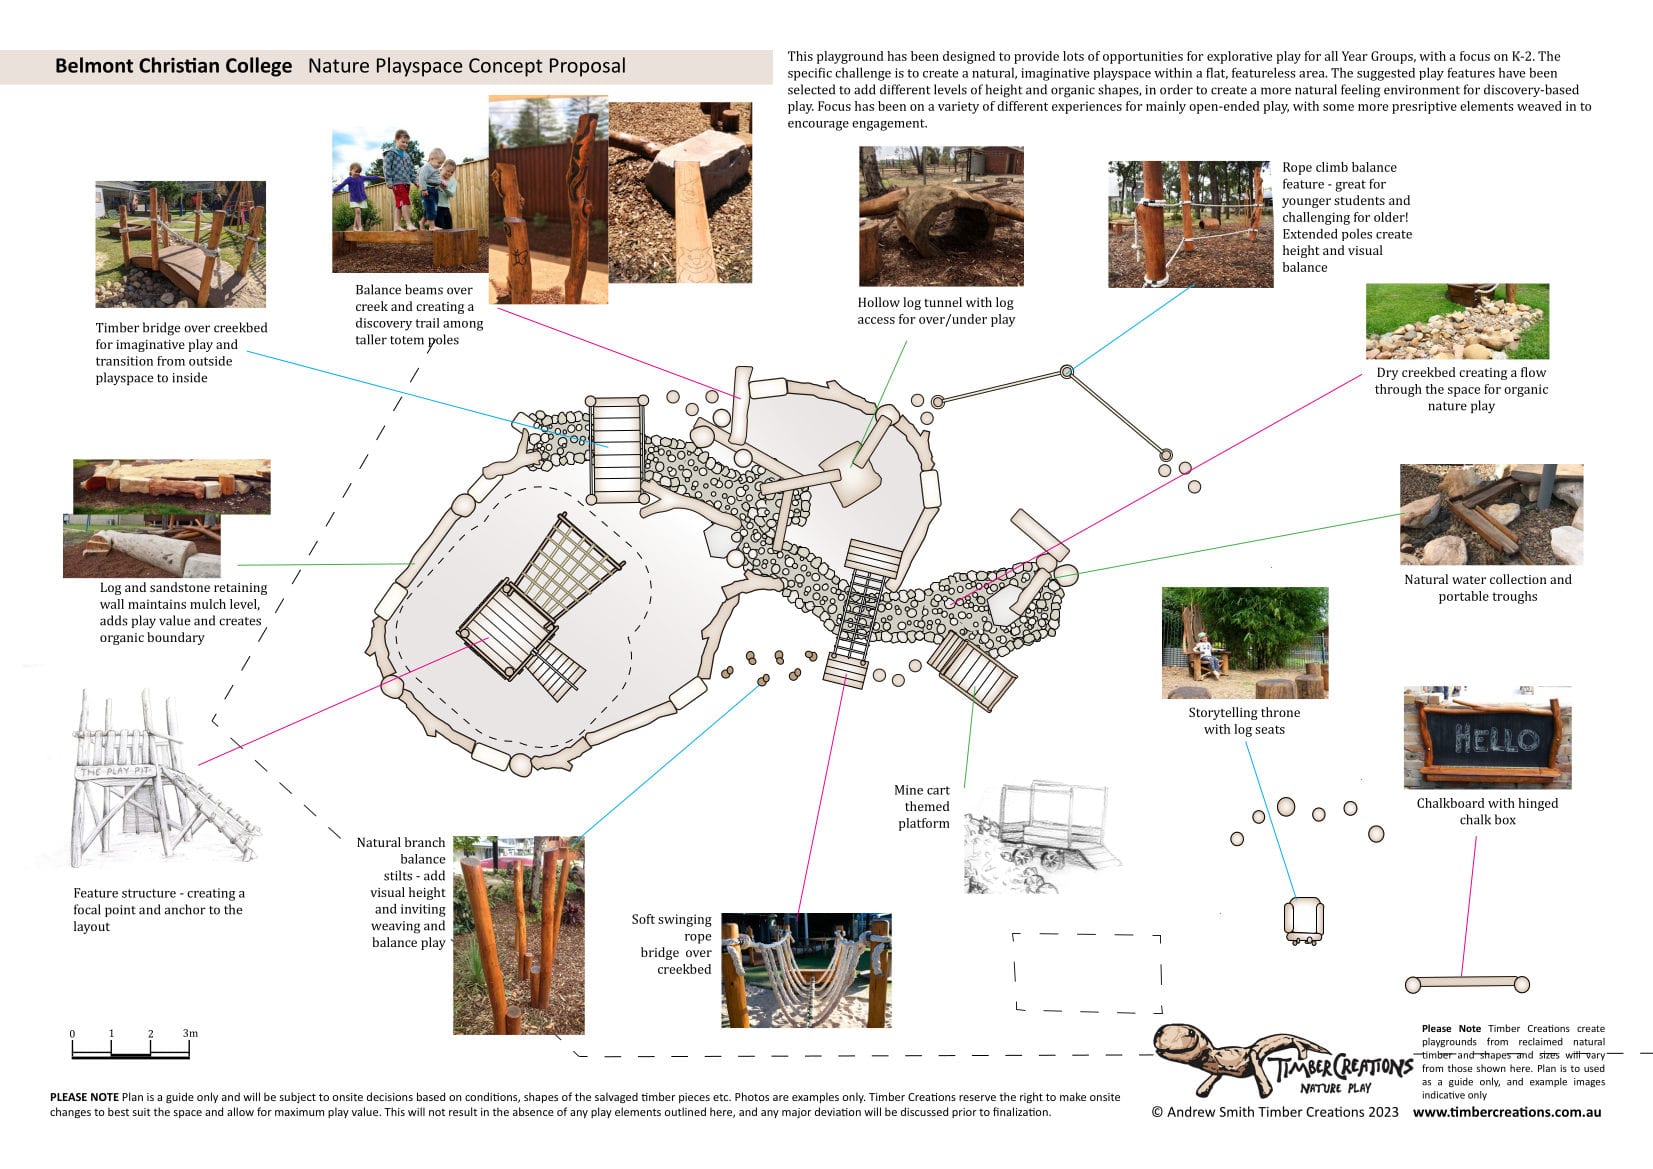  K-2 Nature Playground - Coming Soon, Belmont Christian NATURE PLAYGROUND Concept Design2